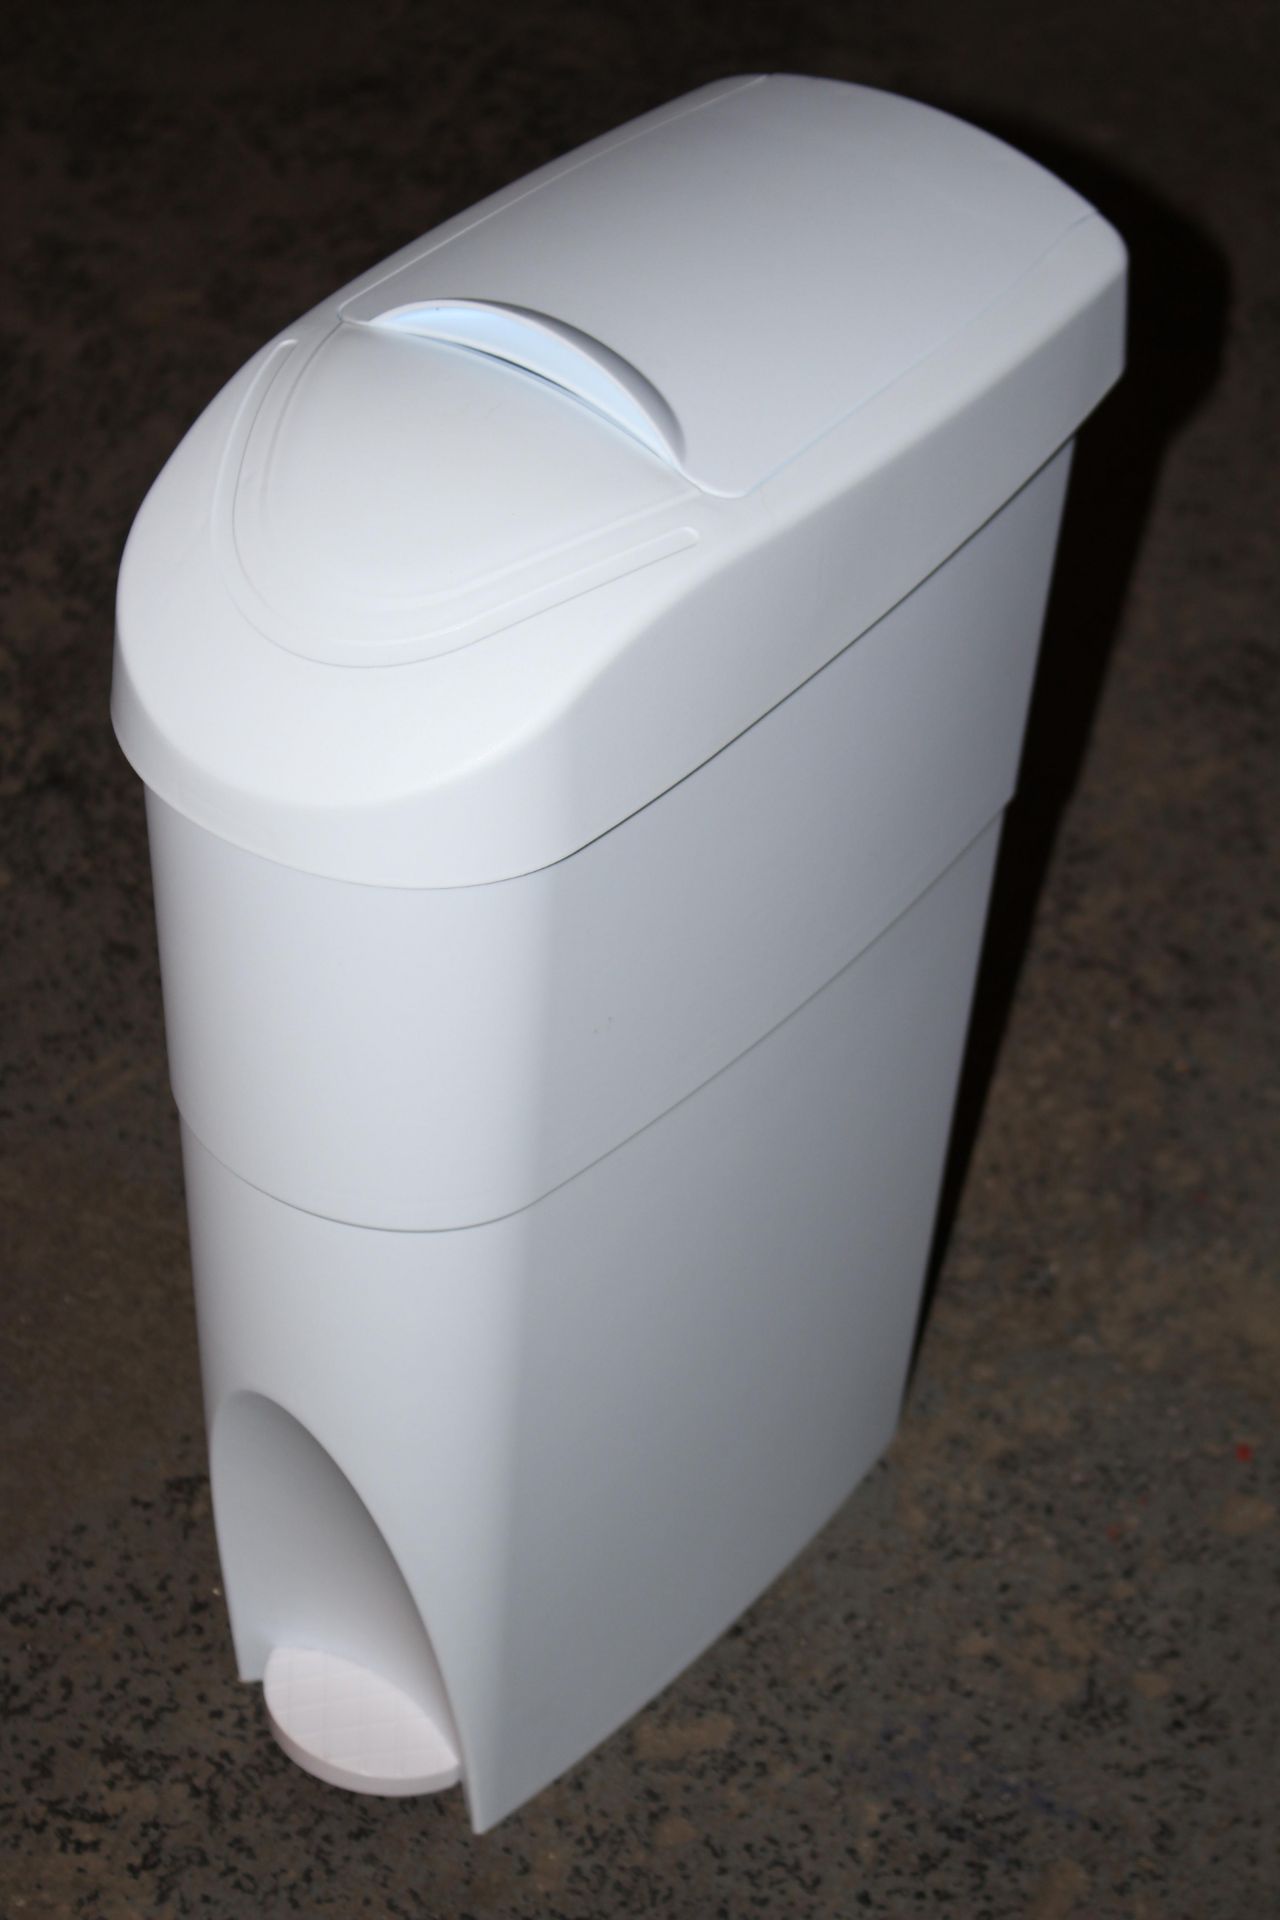 BOXED WHITE SANITARY DISPOSAL SYSTEM PEDAL OPERATED BIN RRP £38.99Condition ReportAppraisal